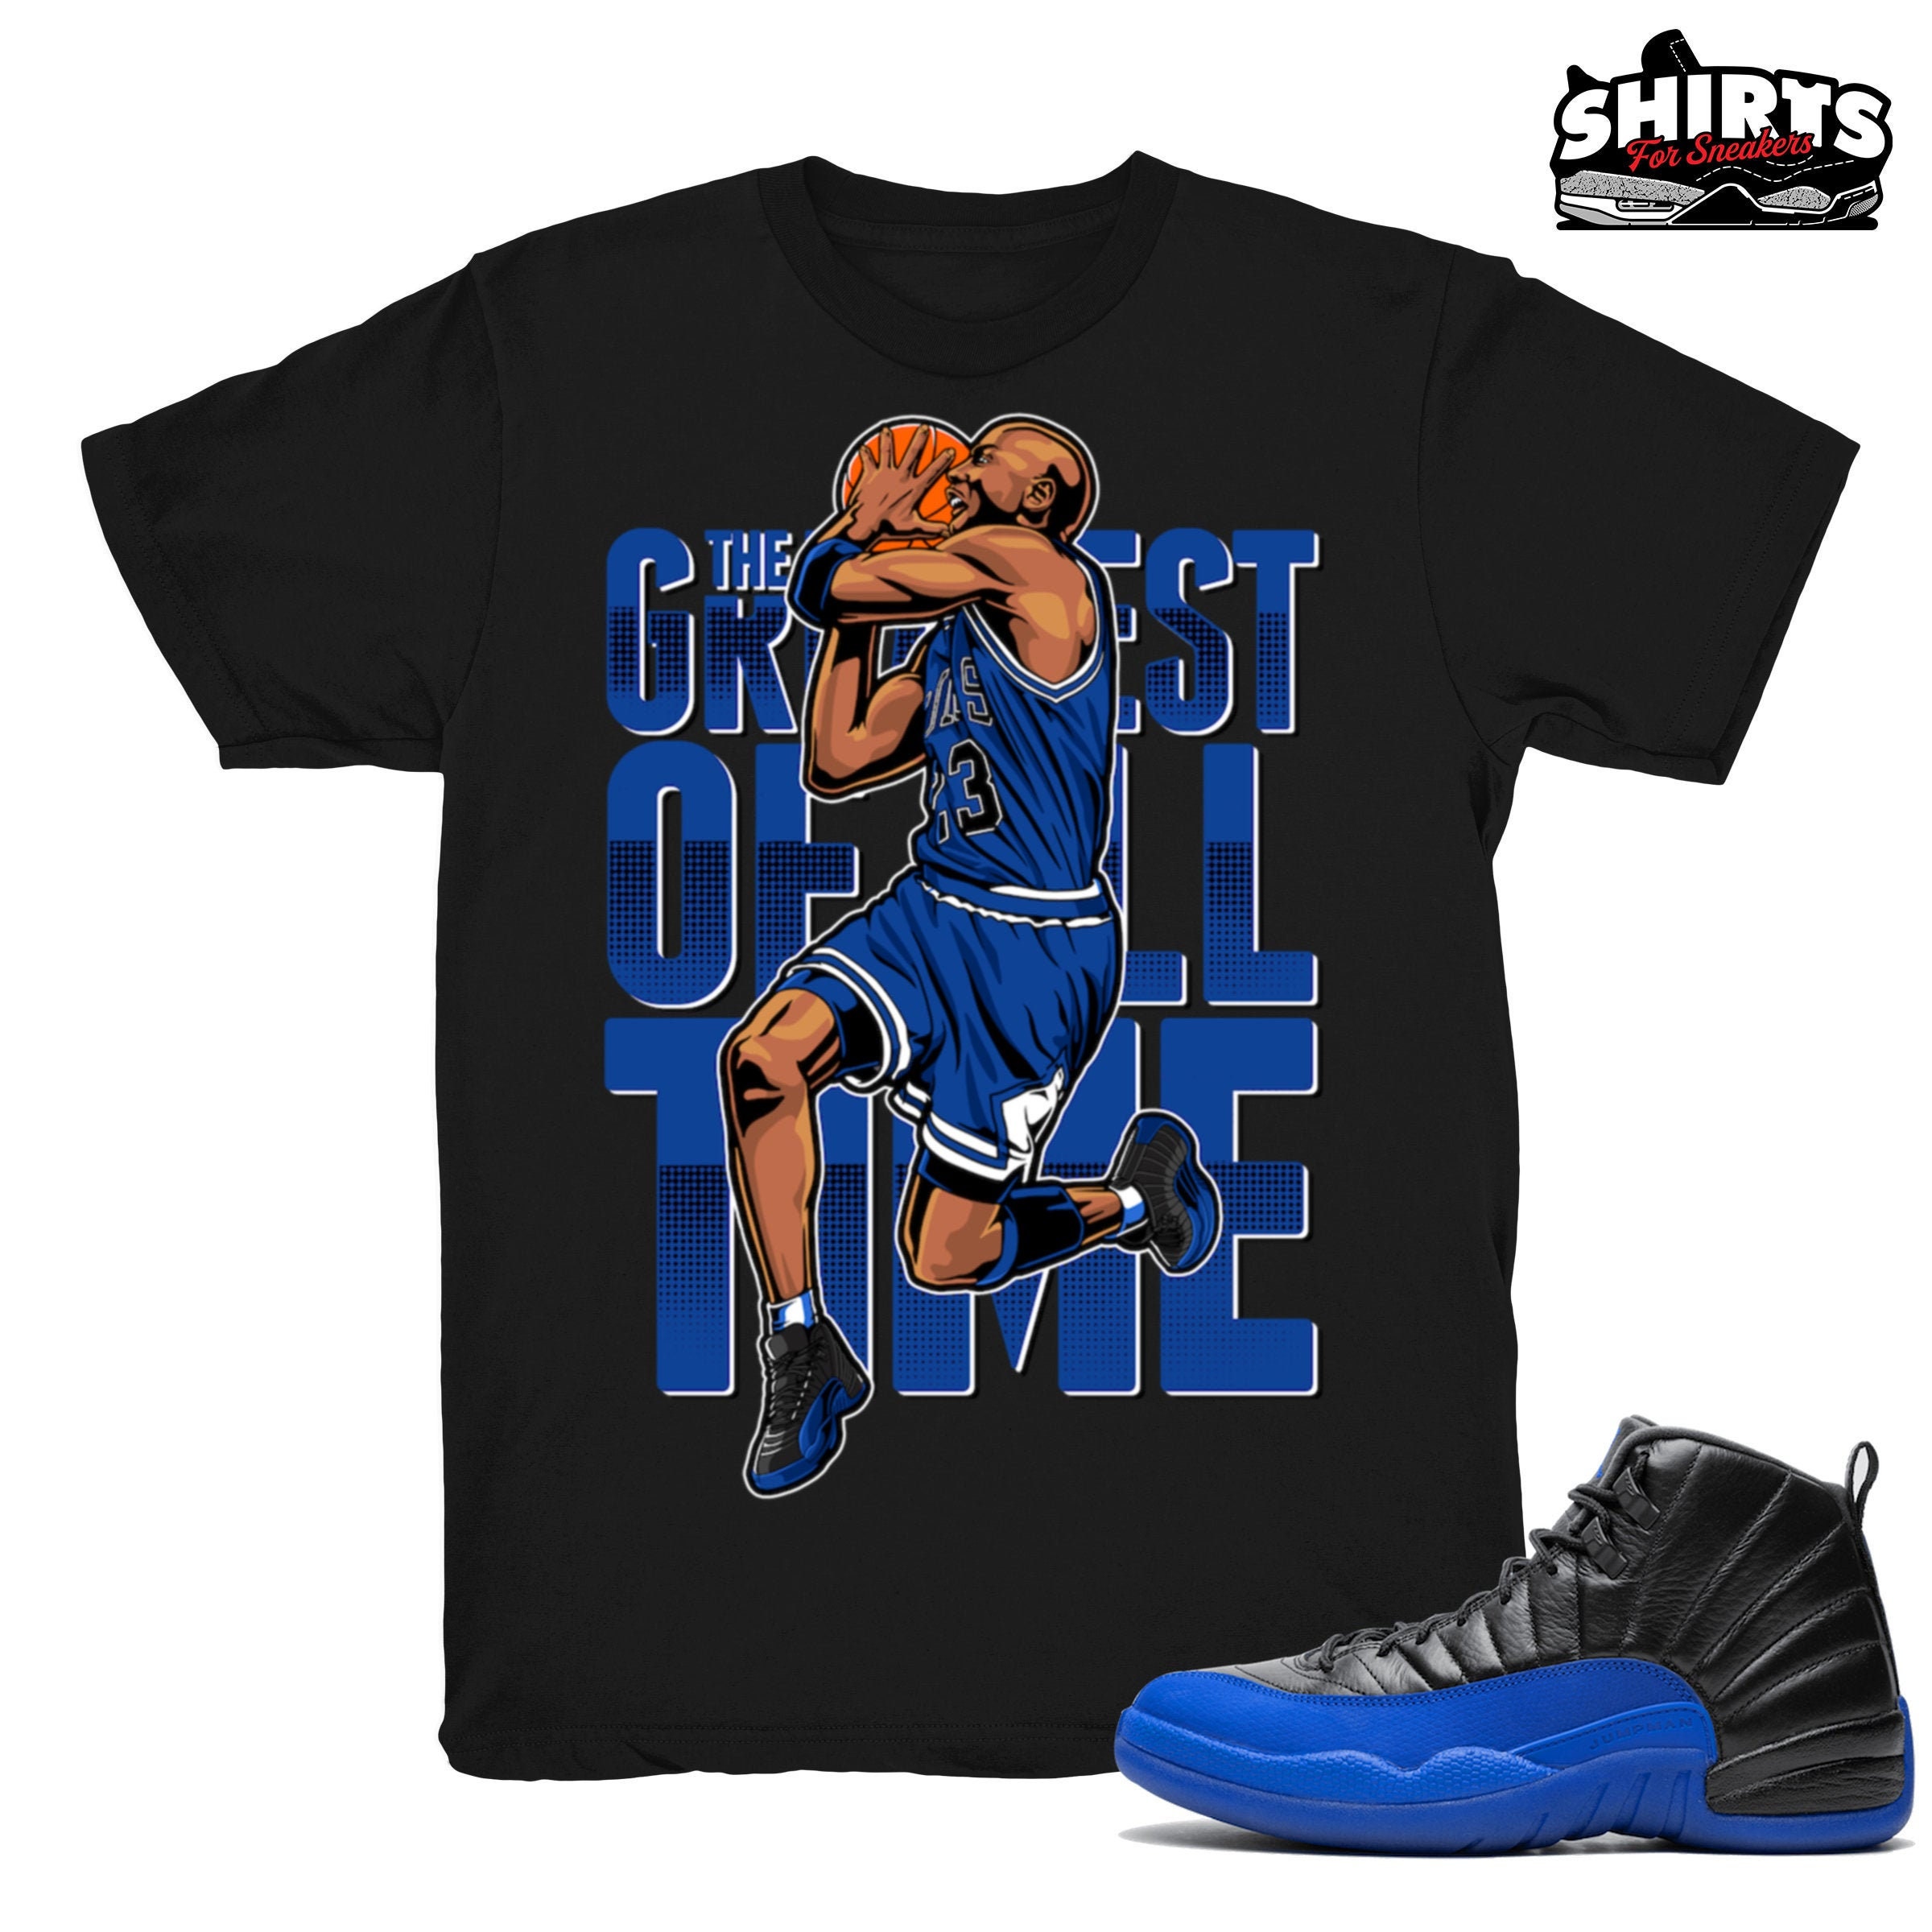 Game Royal 12 Shirt the Greatest Match 